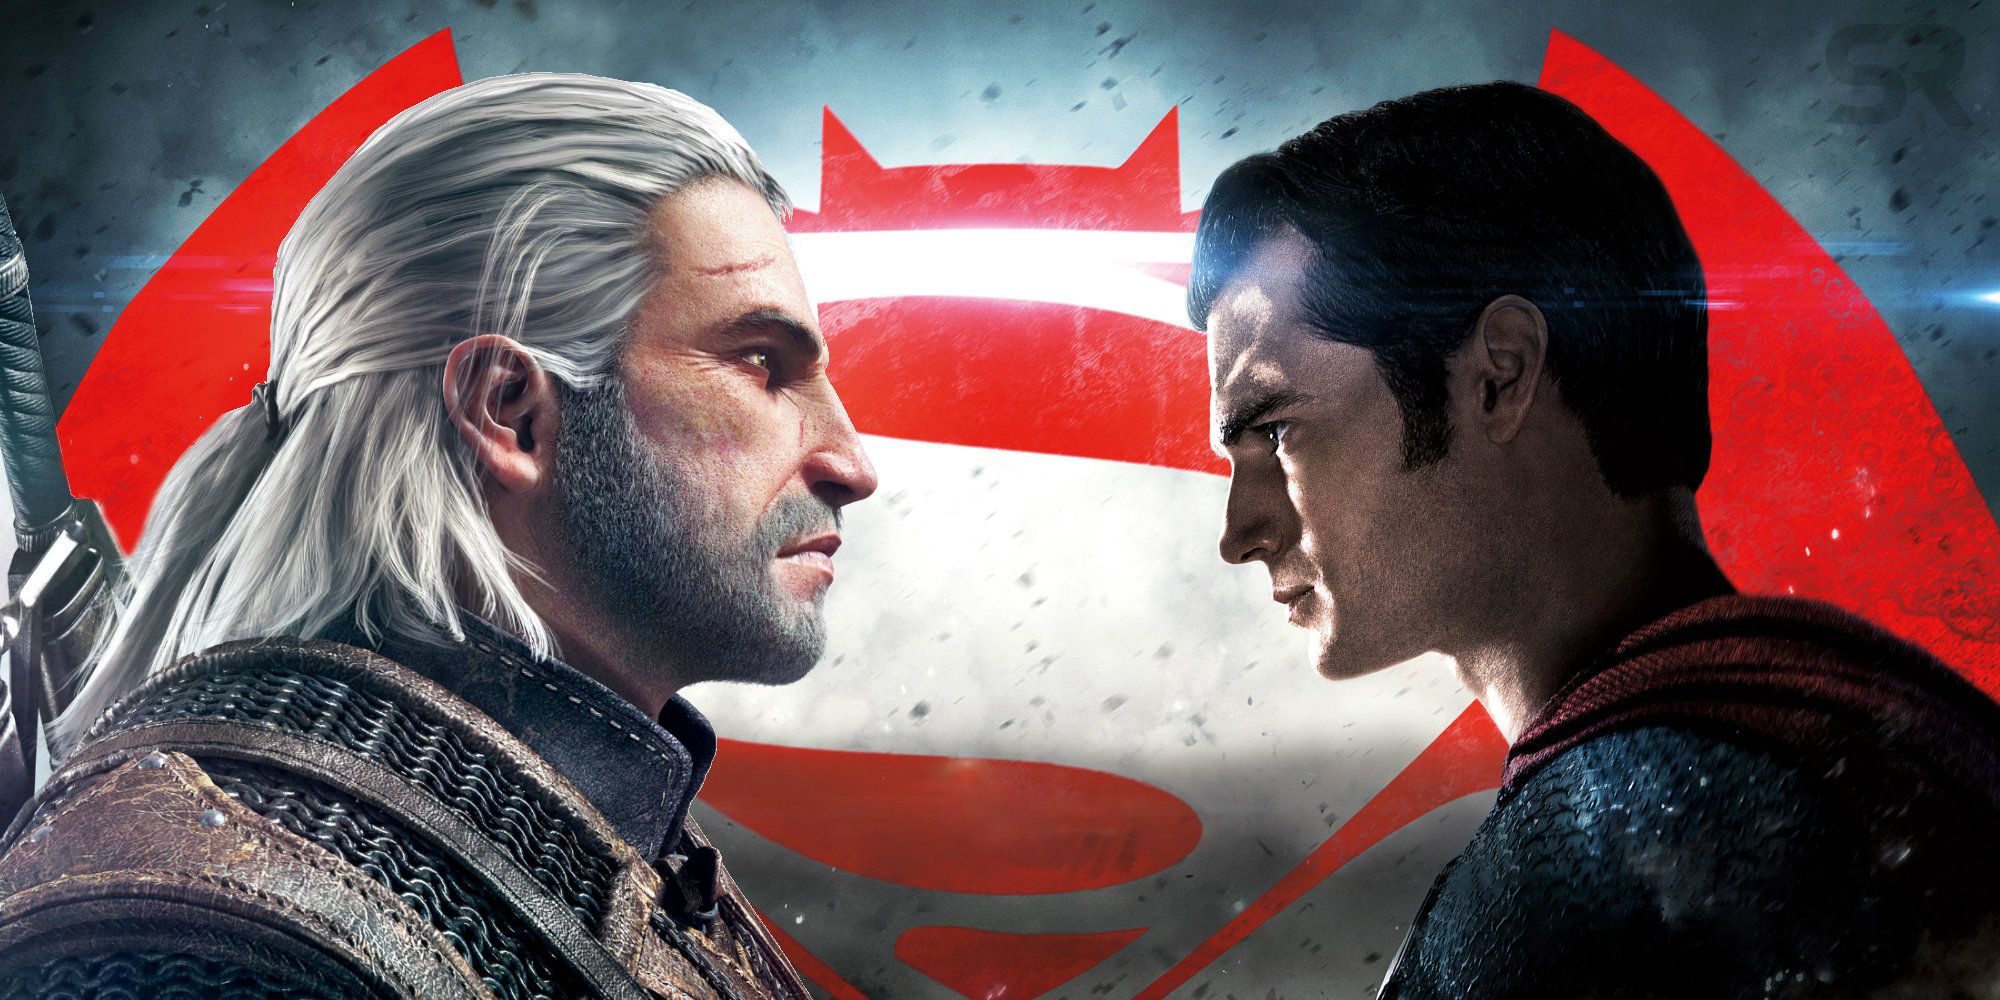 Henry Cavill Movies & TV Shows List: From Man of Steel to The Witcher